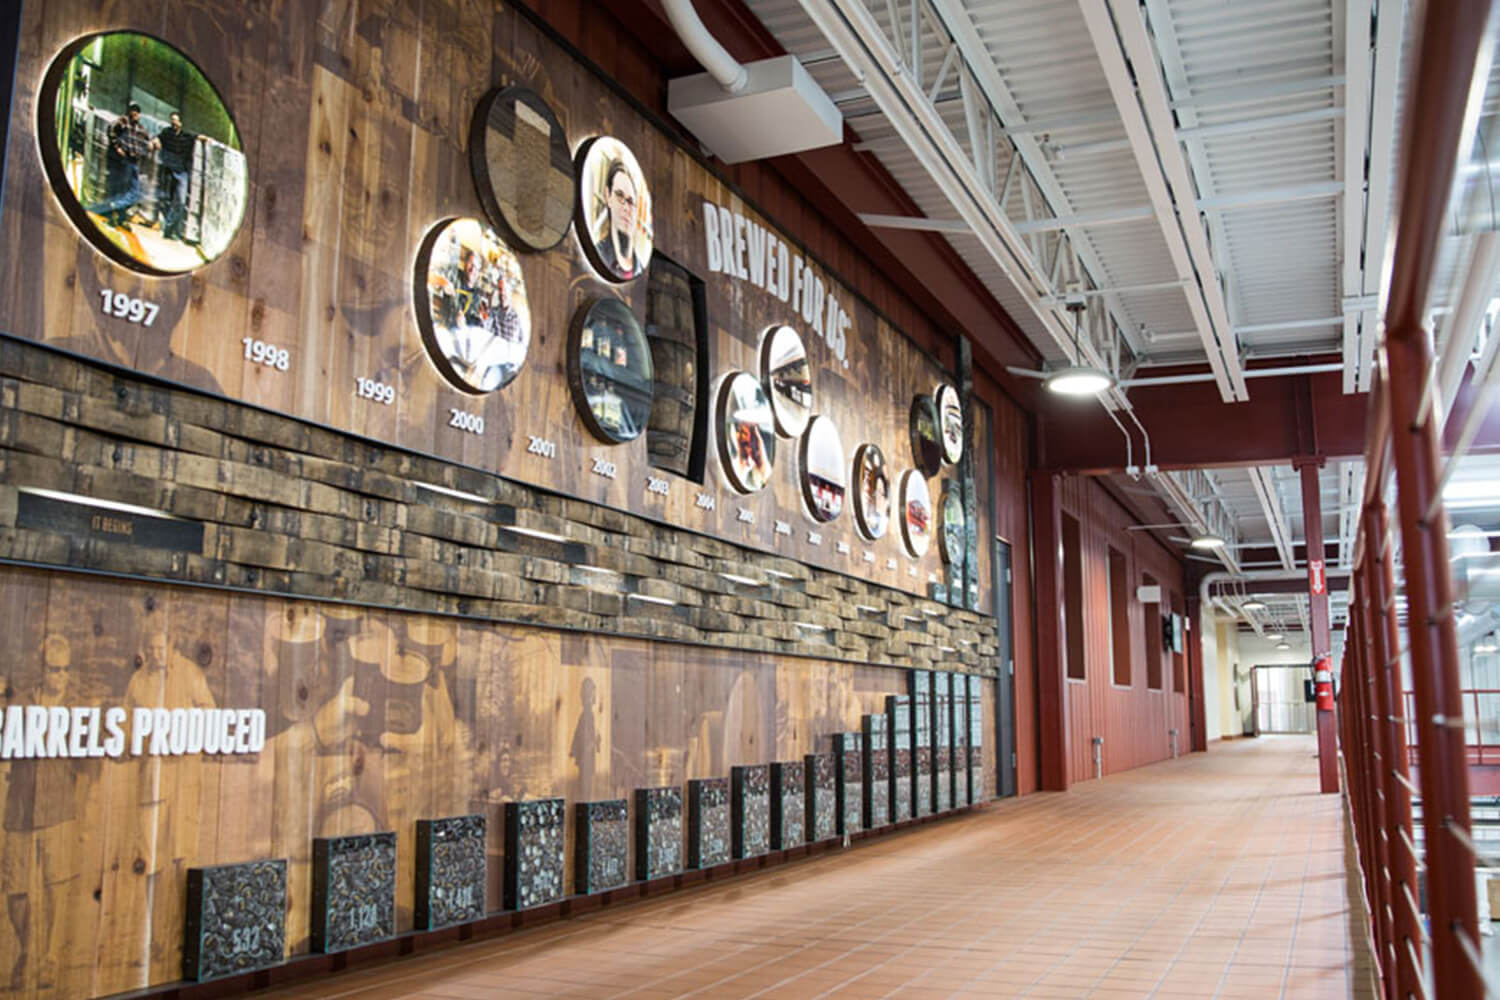 Inside Founders brewing facility